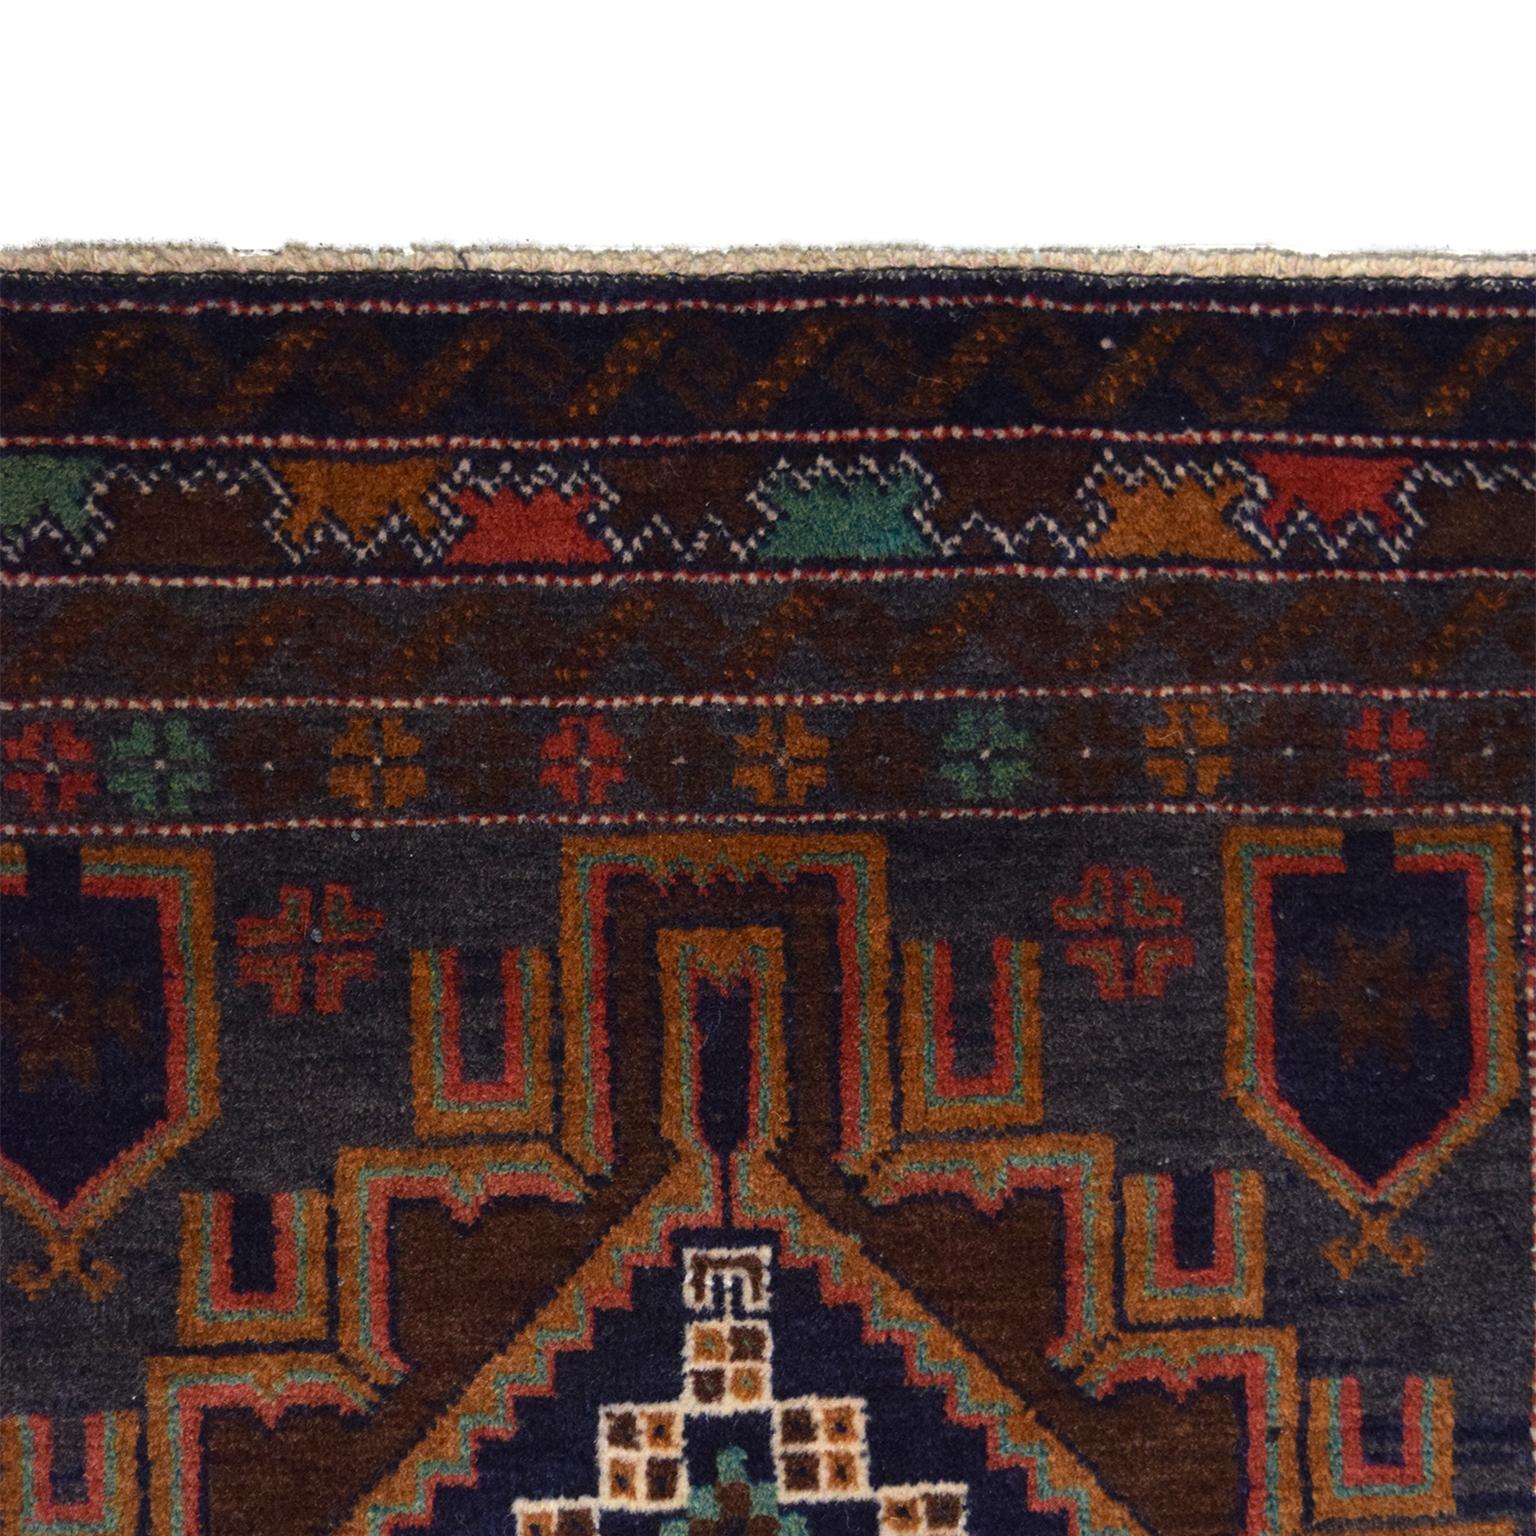 Measuring 3’ x 4’10”, this Persian Balouchi carpet is entirely hand knotted and features a geometric design. The warm shades of blue, red, gold, brown, and green come from the organic vegetable dyes used in the hand-spun wool. Due to the traditional